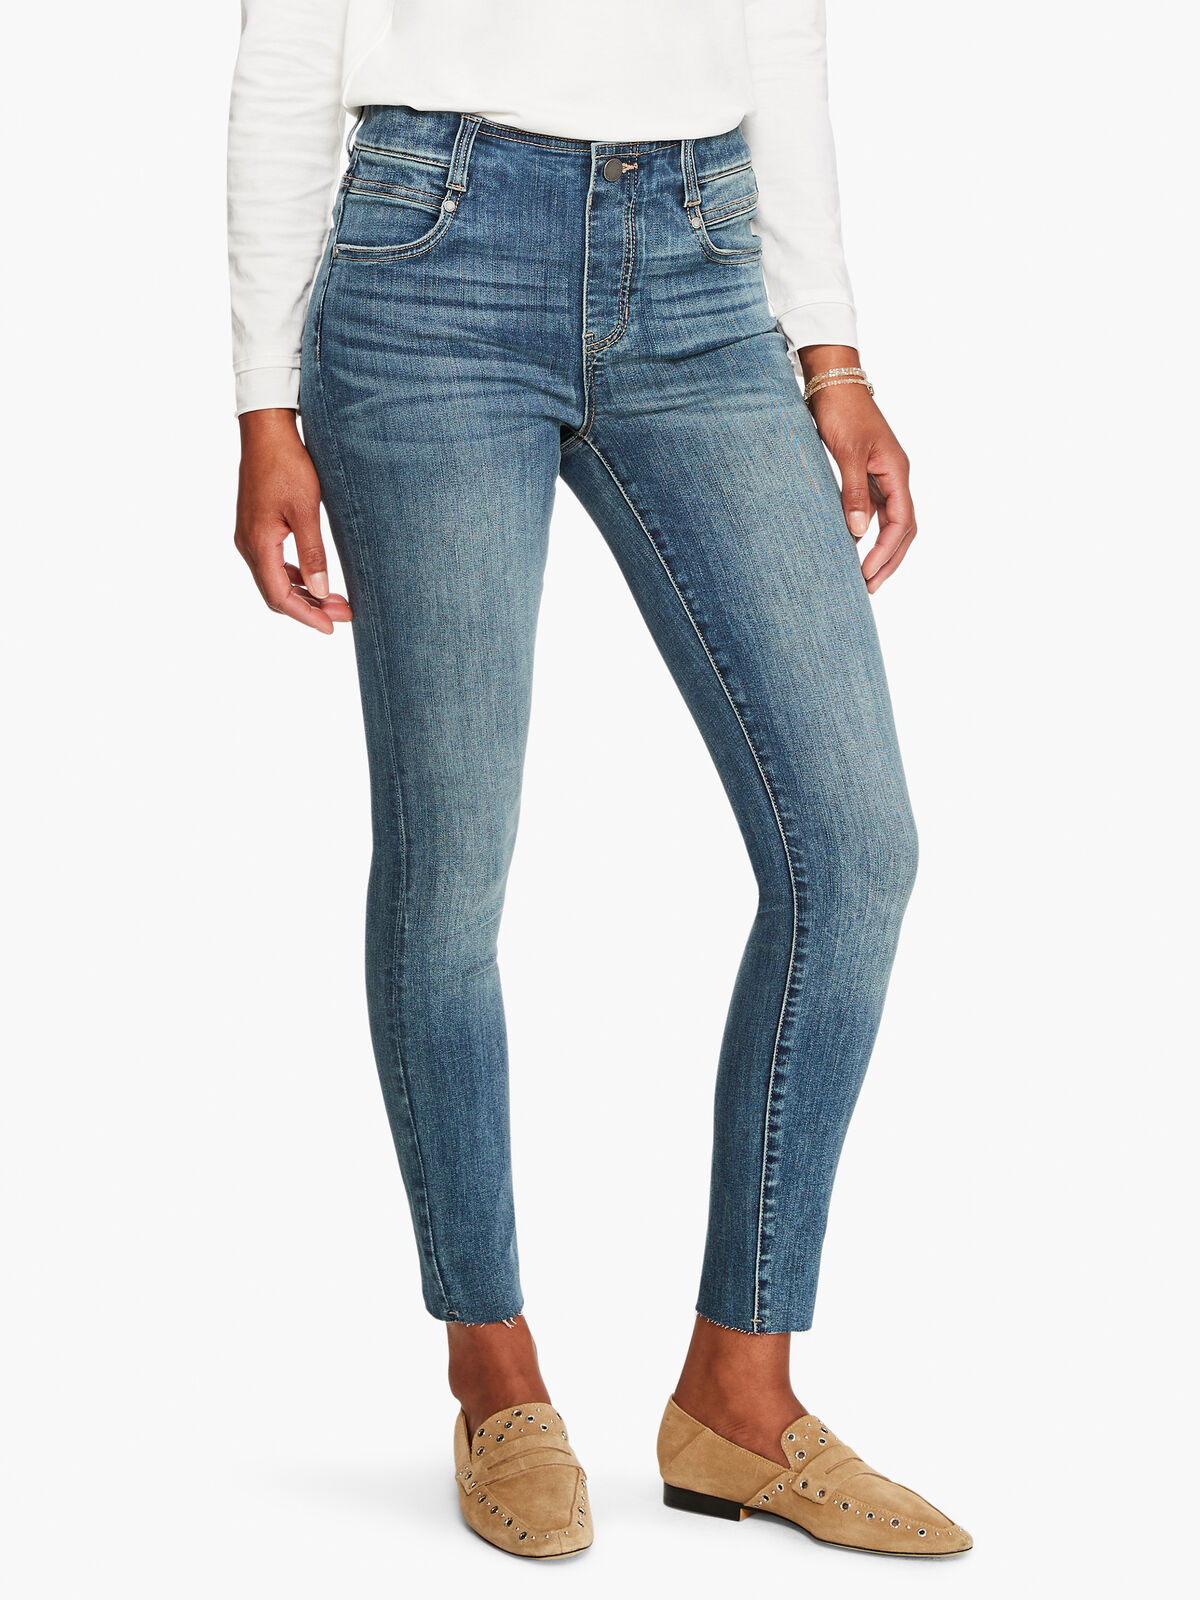 Liverpool - Gia Glider Ankle Skinny Jean